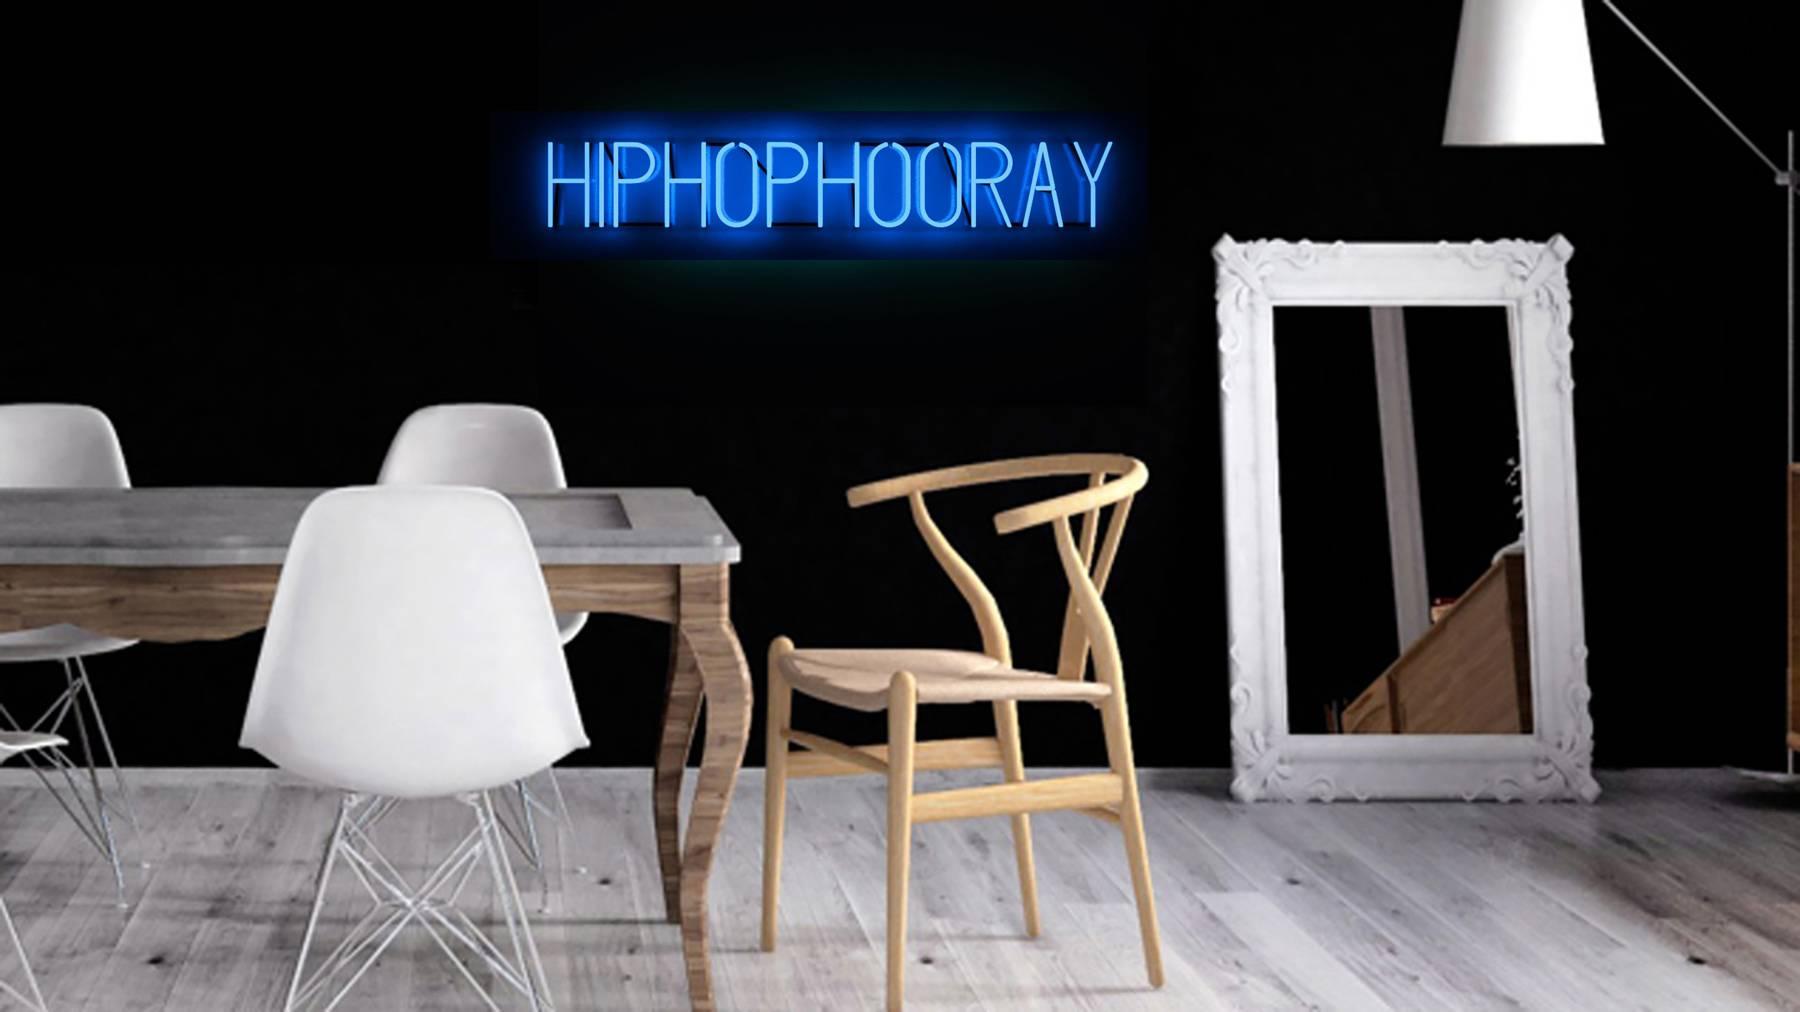 HipHopHooray - Sculpture by Mary Jo McGonagle